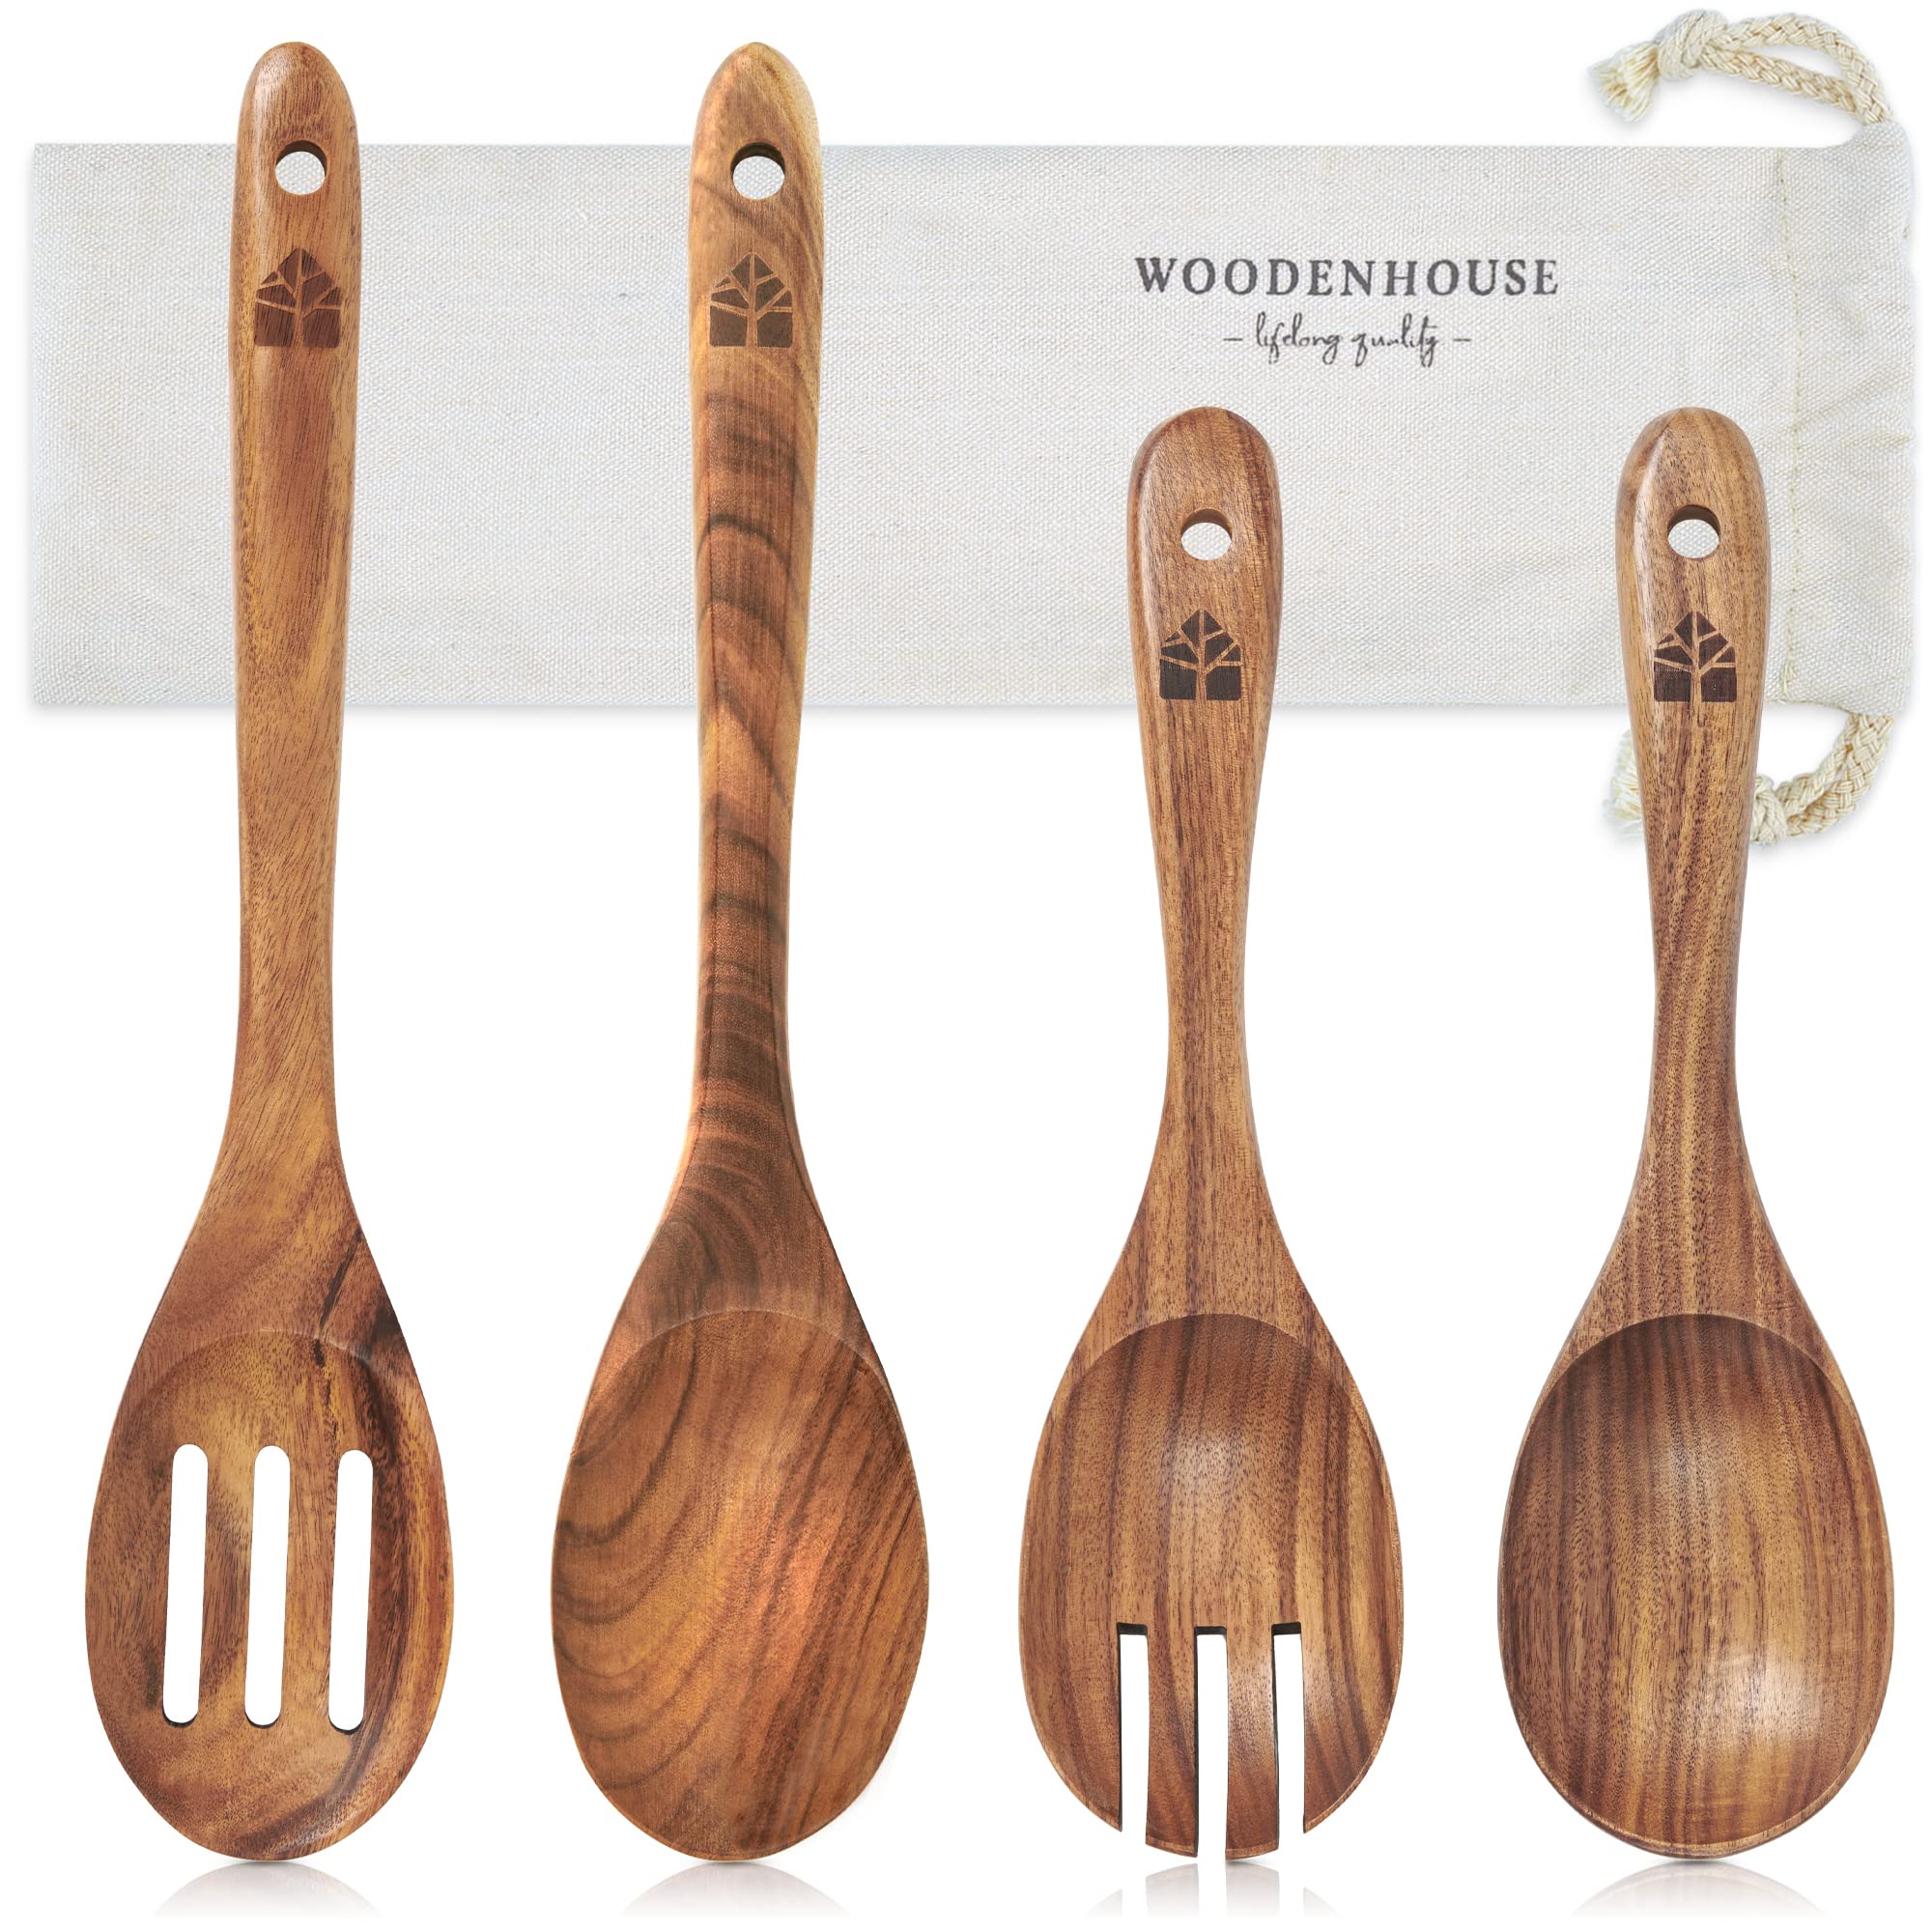 Lieonvis 6 Pcs Wooden Spoons for Cooking,Smooth Finish Teak Wooden